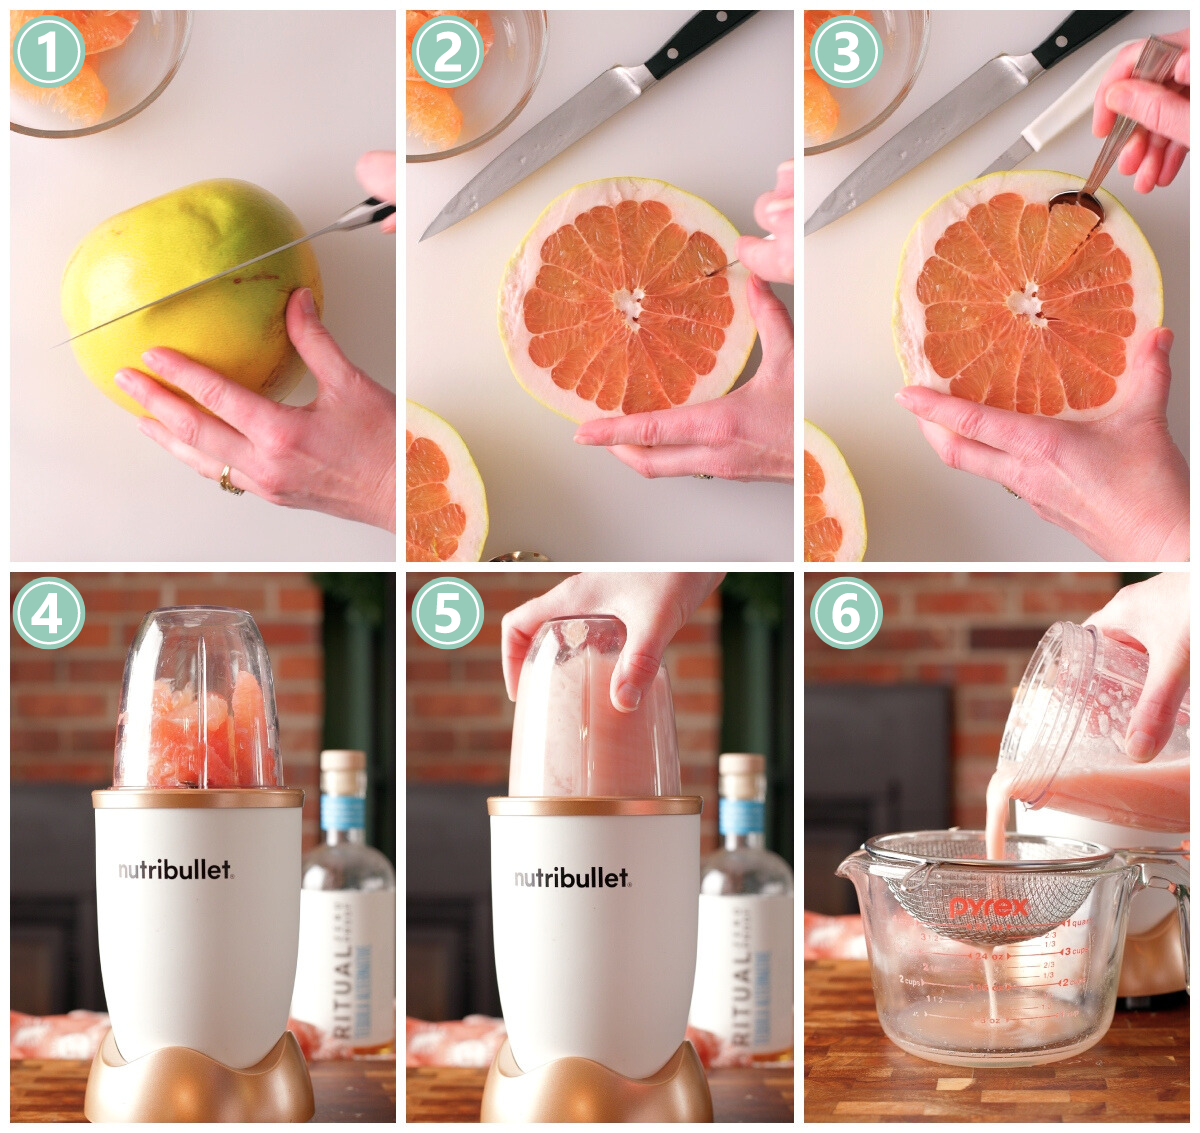 photo collage showing how to make pomelo juice in a blender.